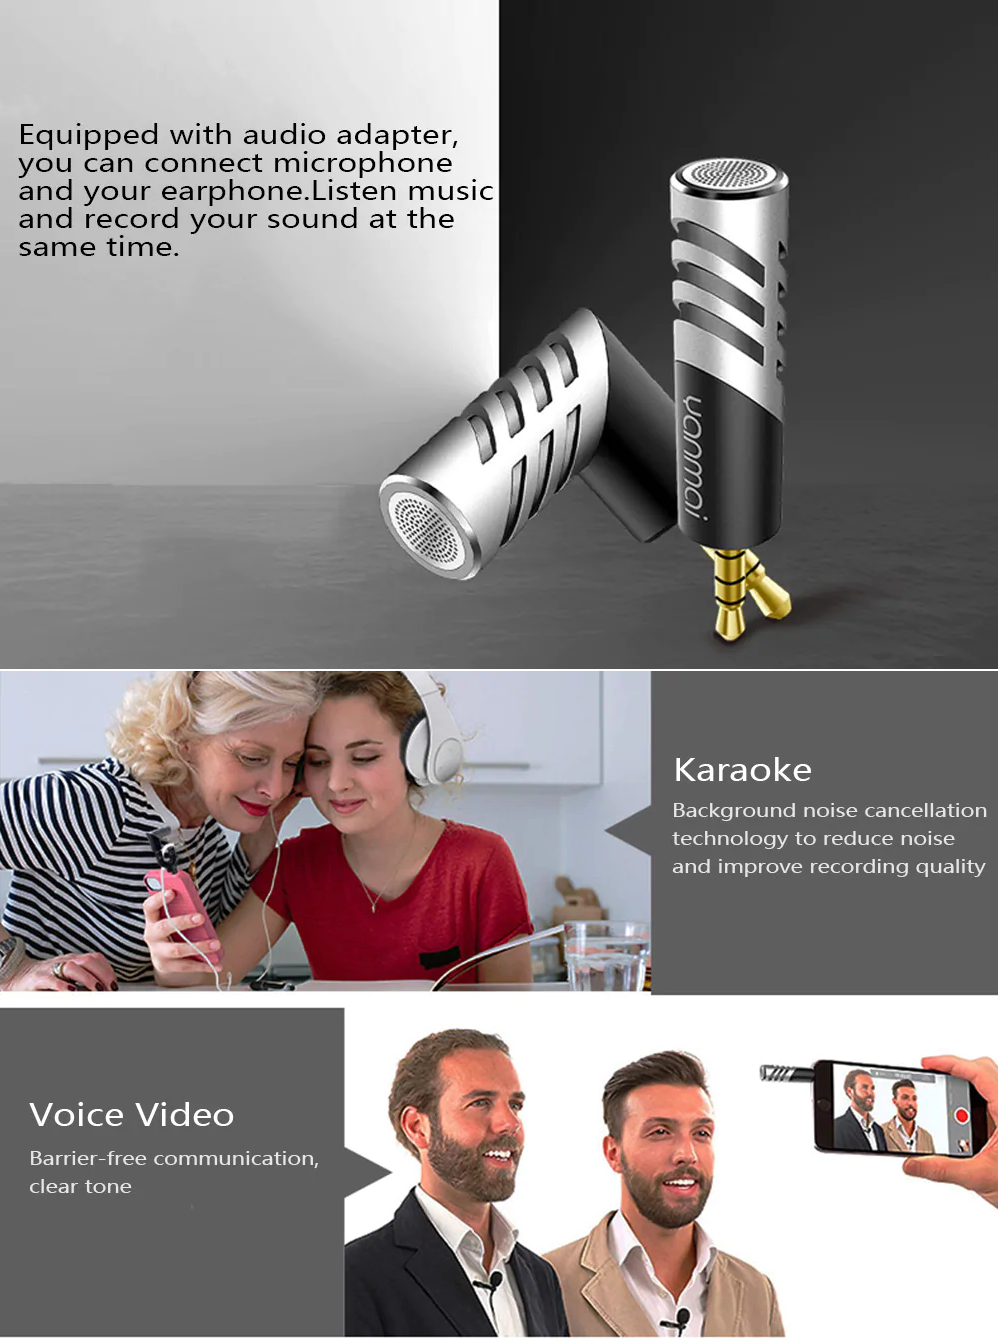 Yanmai-R1-Portable-Mobile-Phone-Sound-Recording-Microphone-Condenser-Microphone-For-PC-Phone-iPad-Ca-1532232